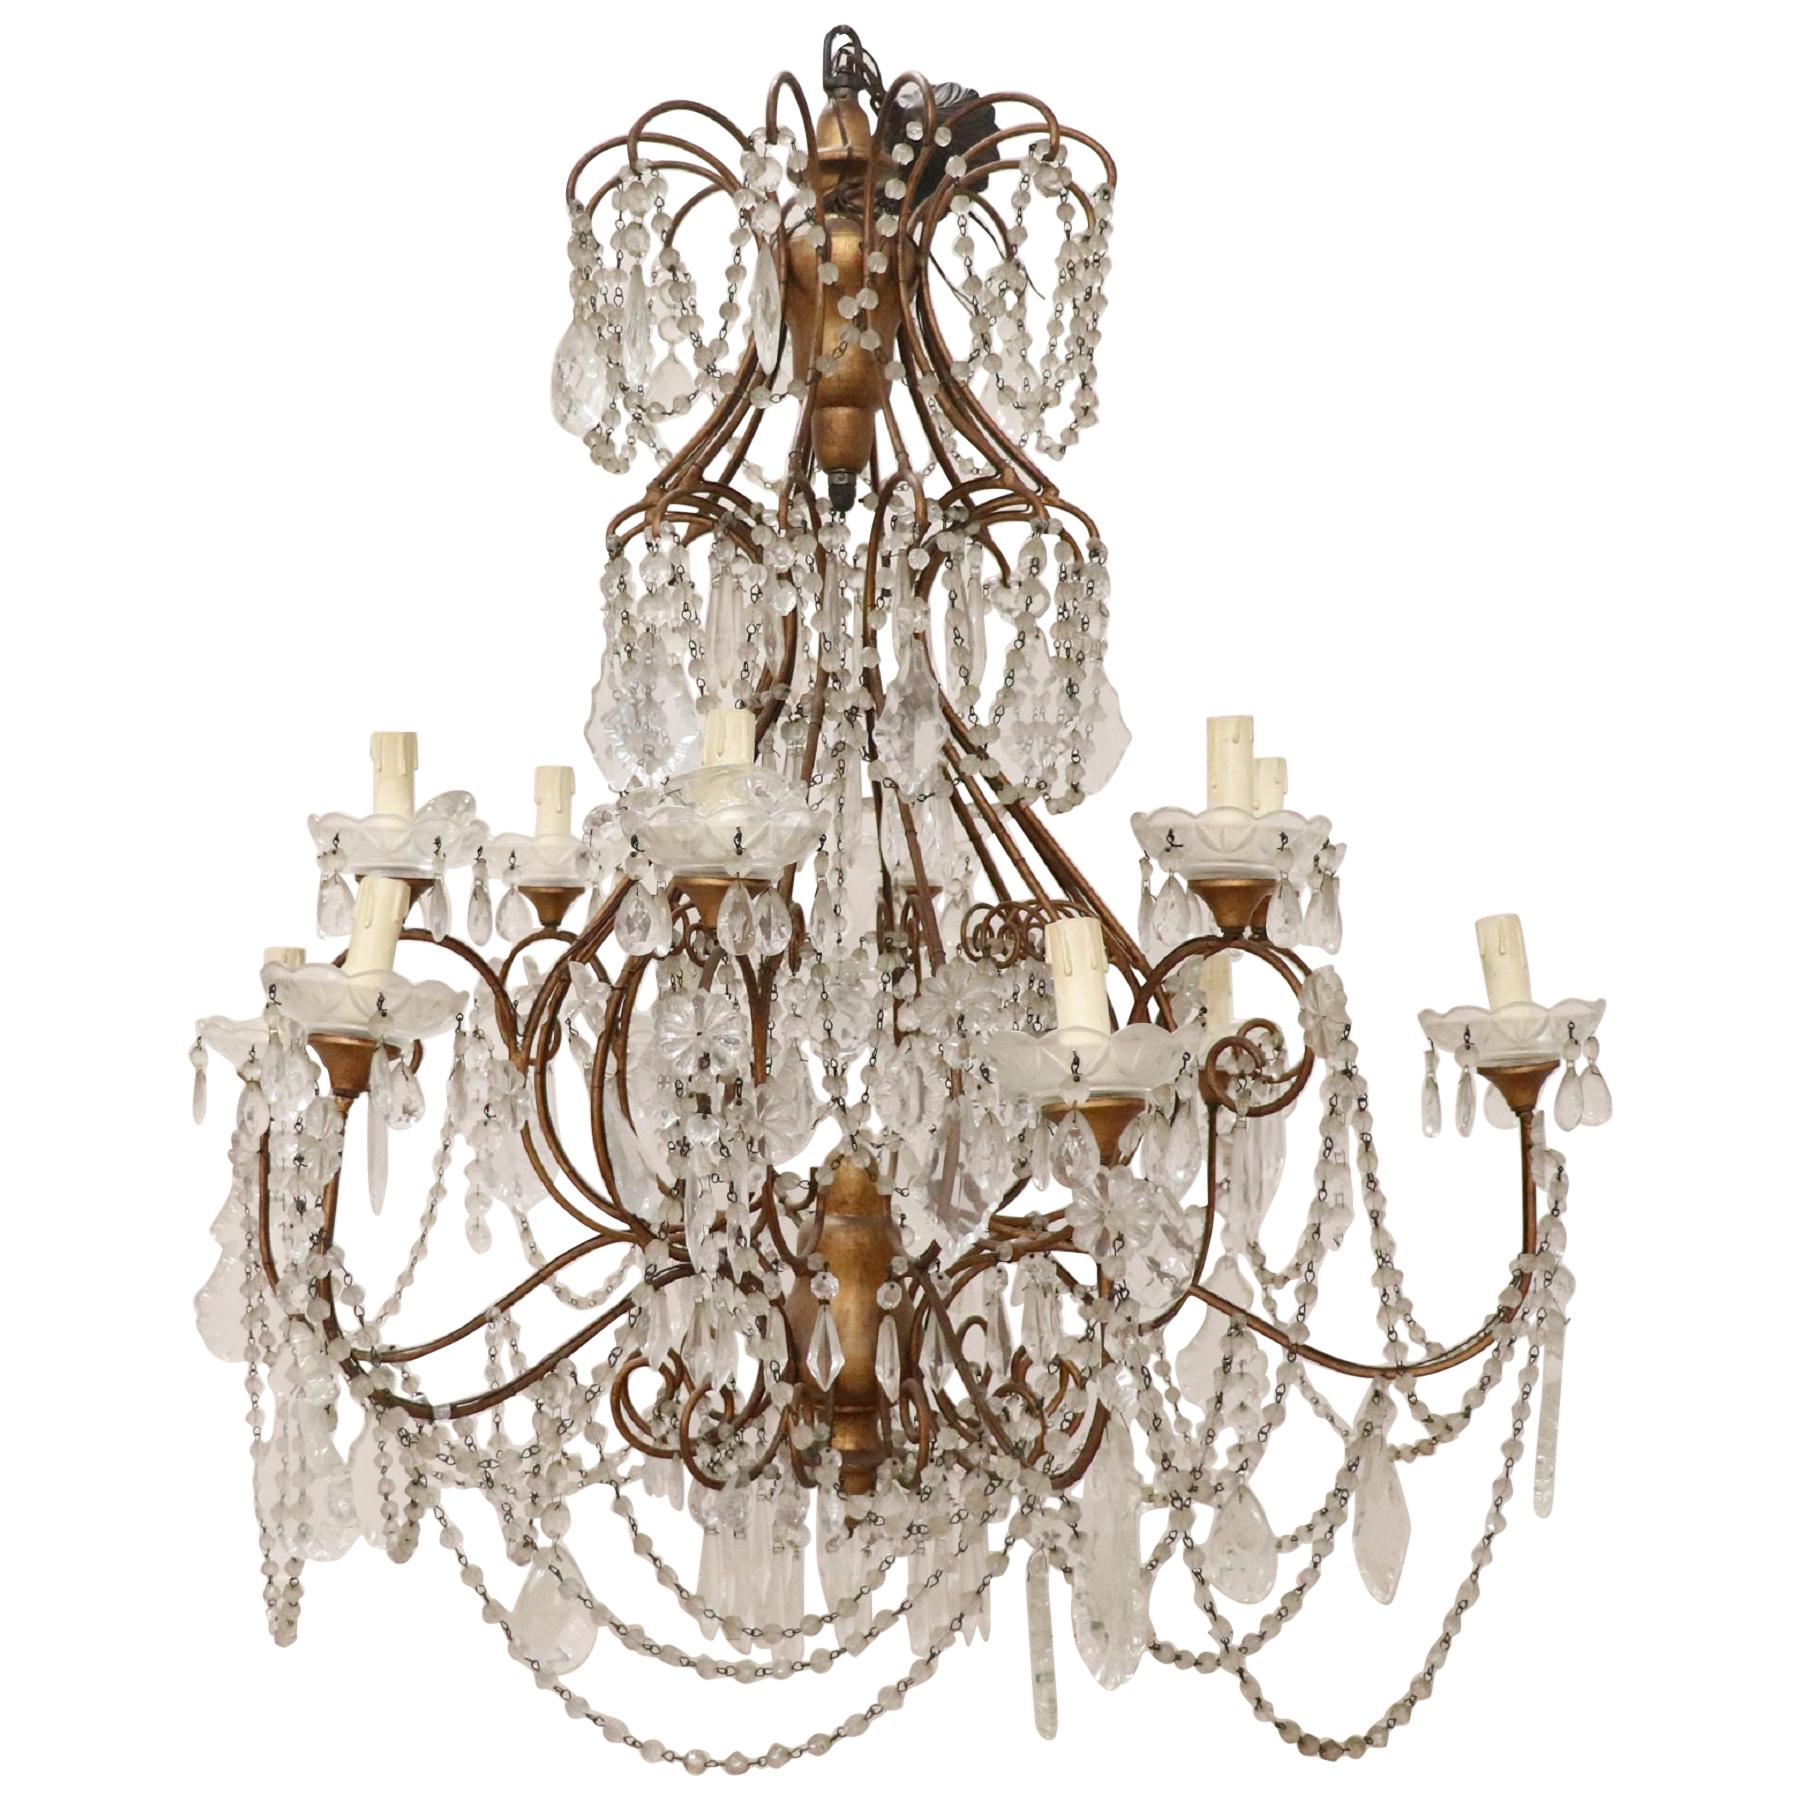 20th Century Louis XVI Style Gilded Bronze and Crystals Large Luxury Chandelier